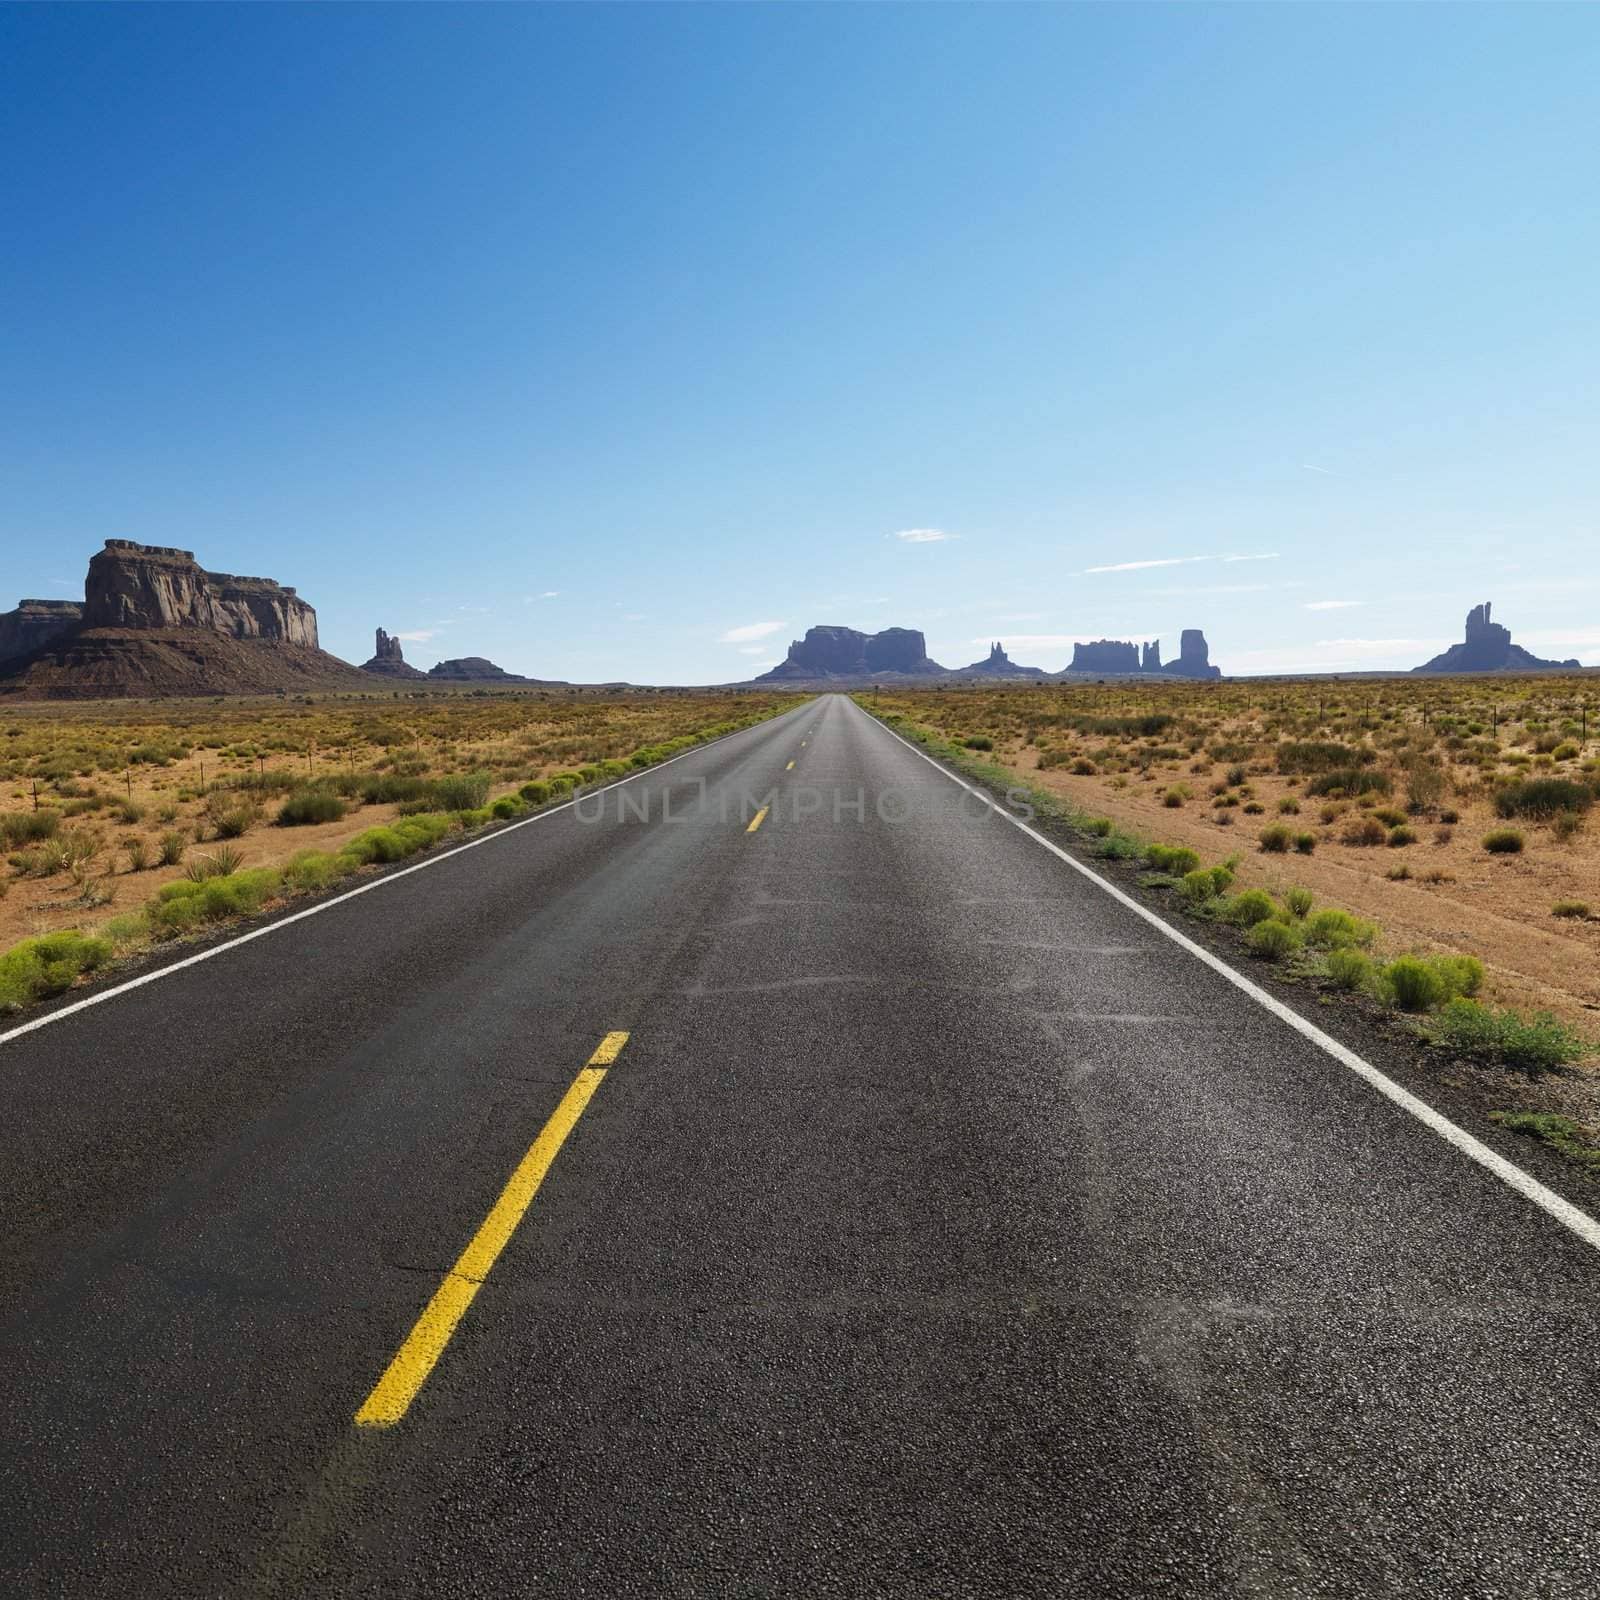 Open road in scenic desert landscape with distant mountains and mesas.